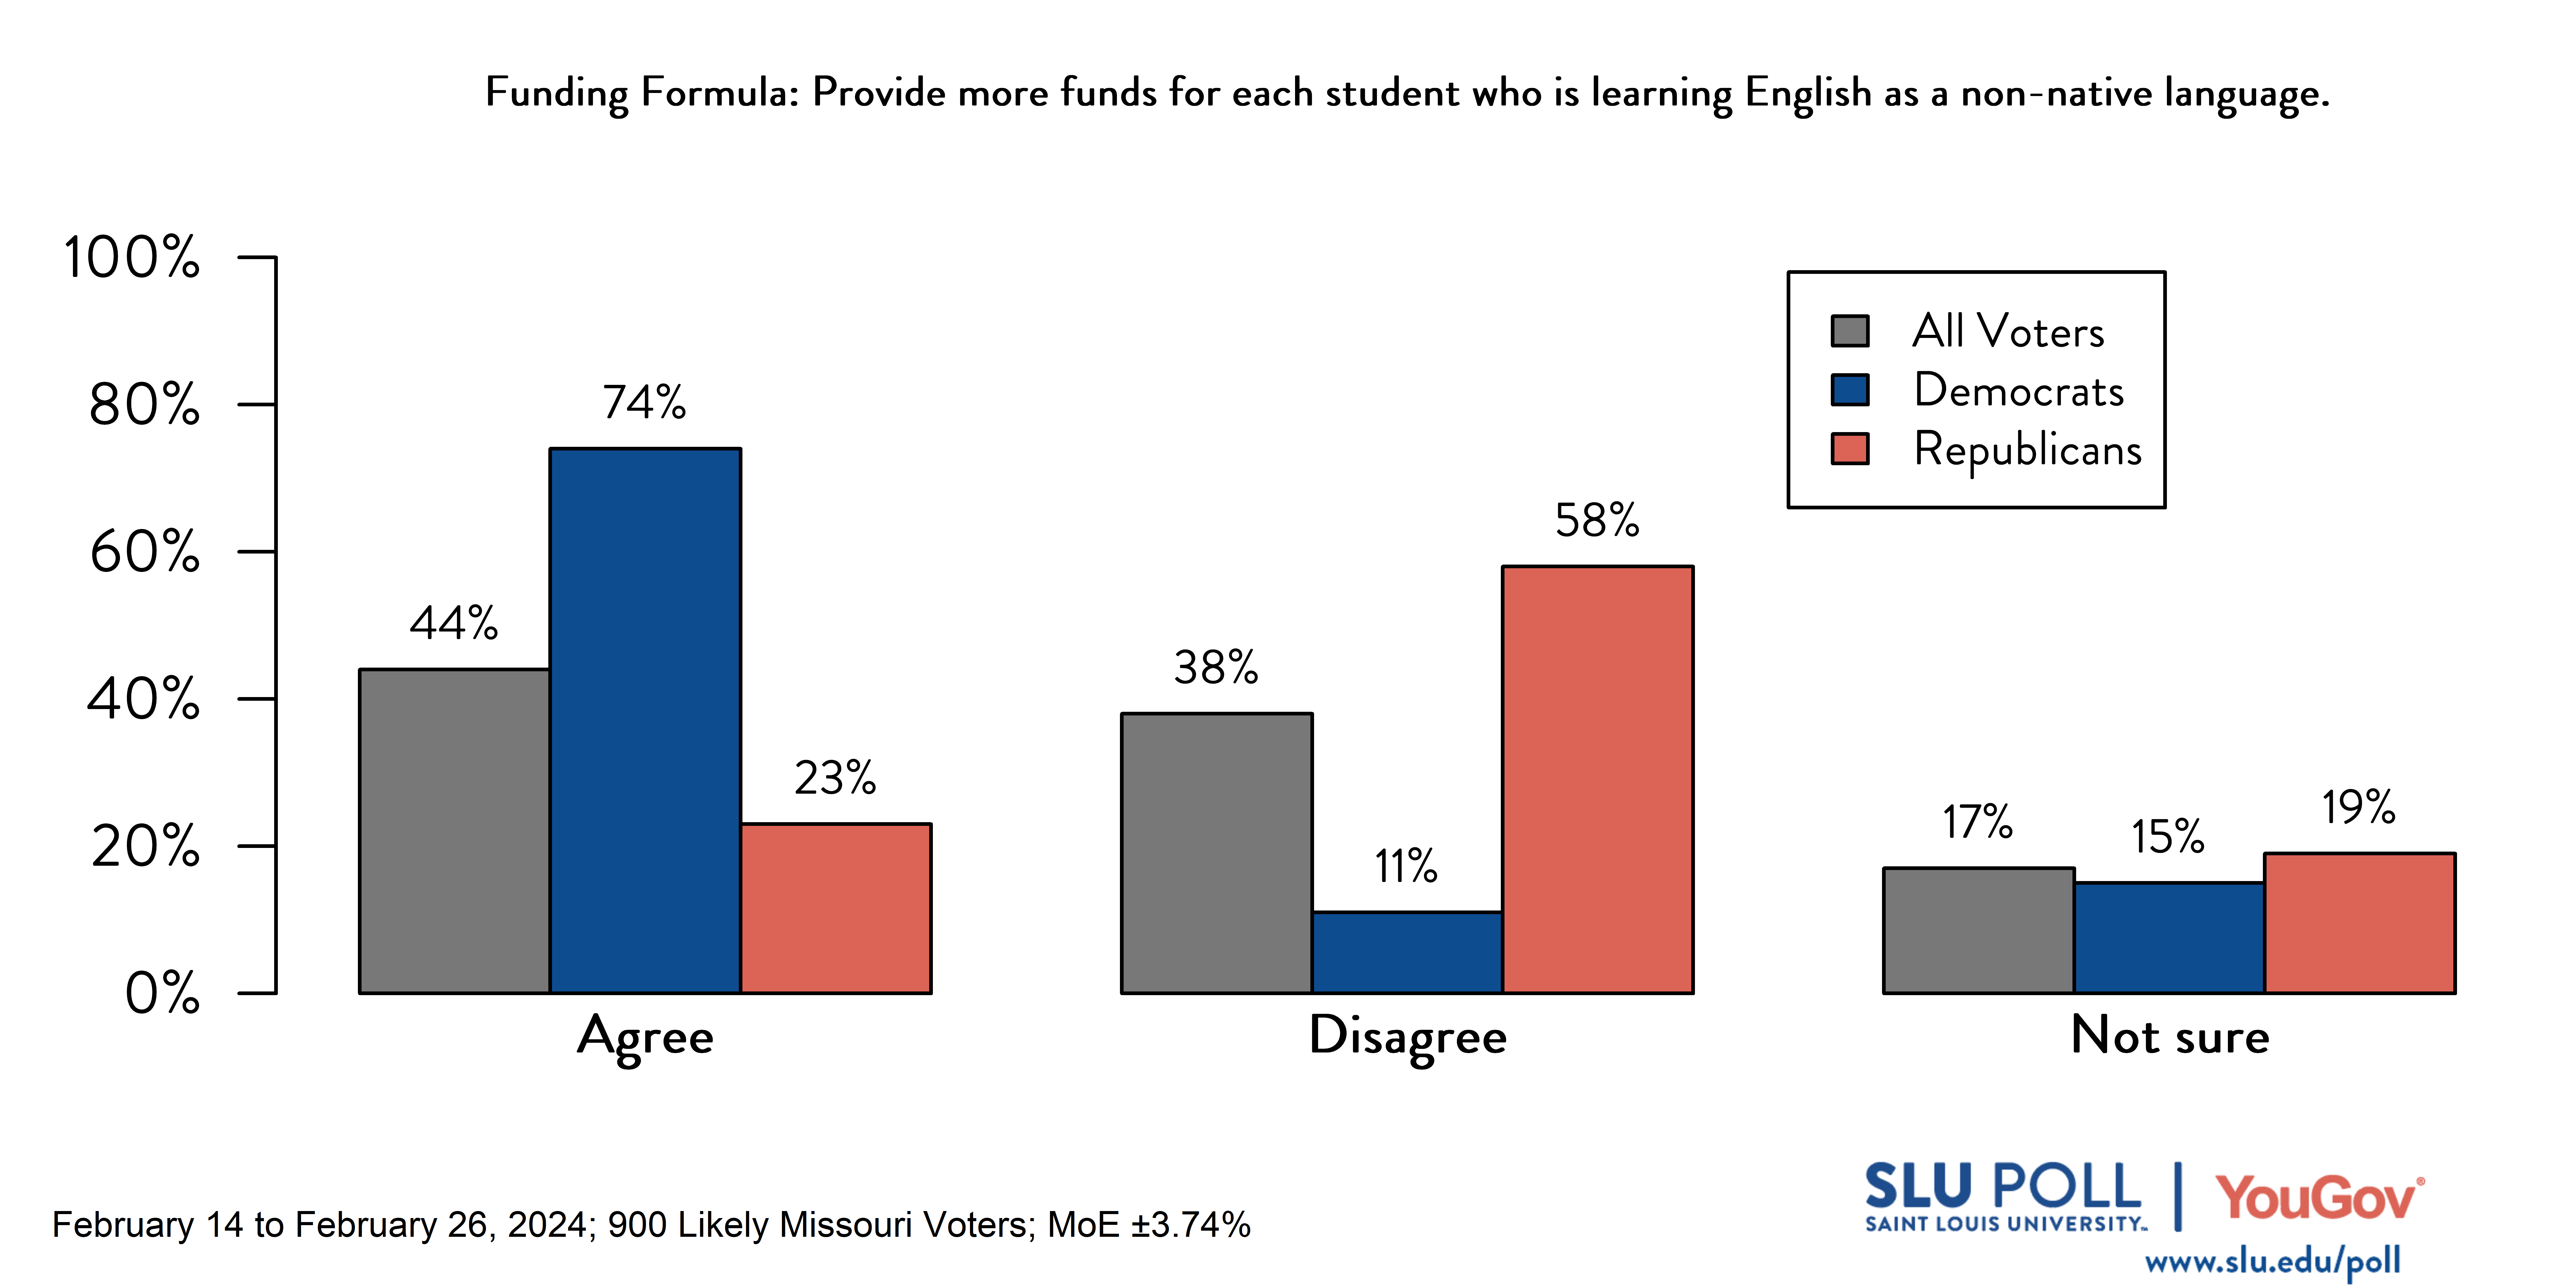 Bar graph of SLU/YouGov Poll results for school funding formula non-English question. Results in caption.